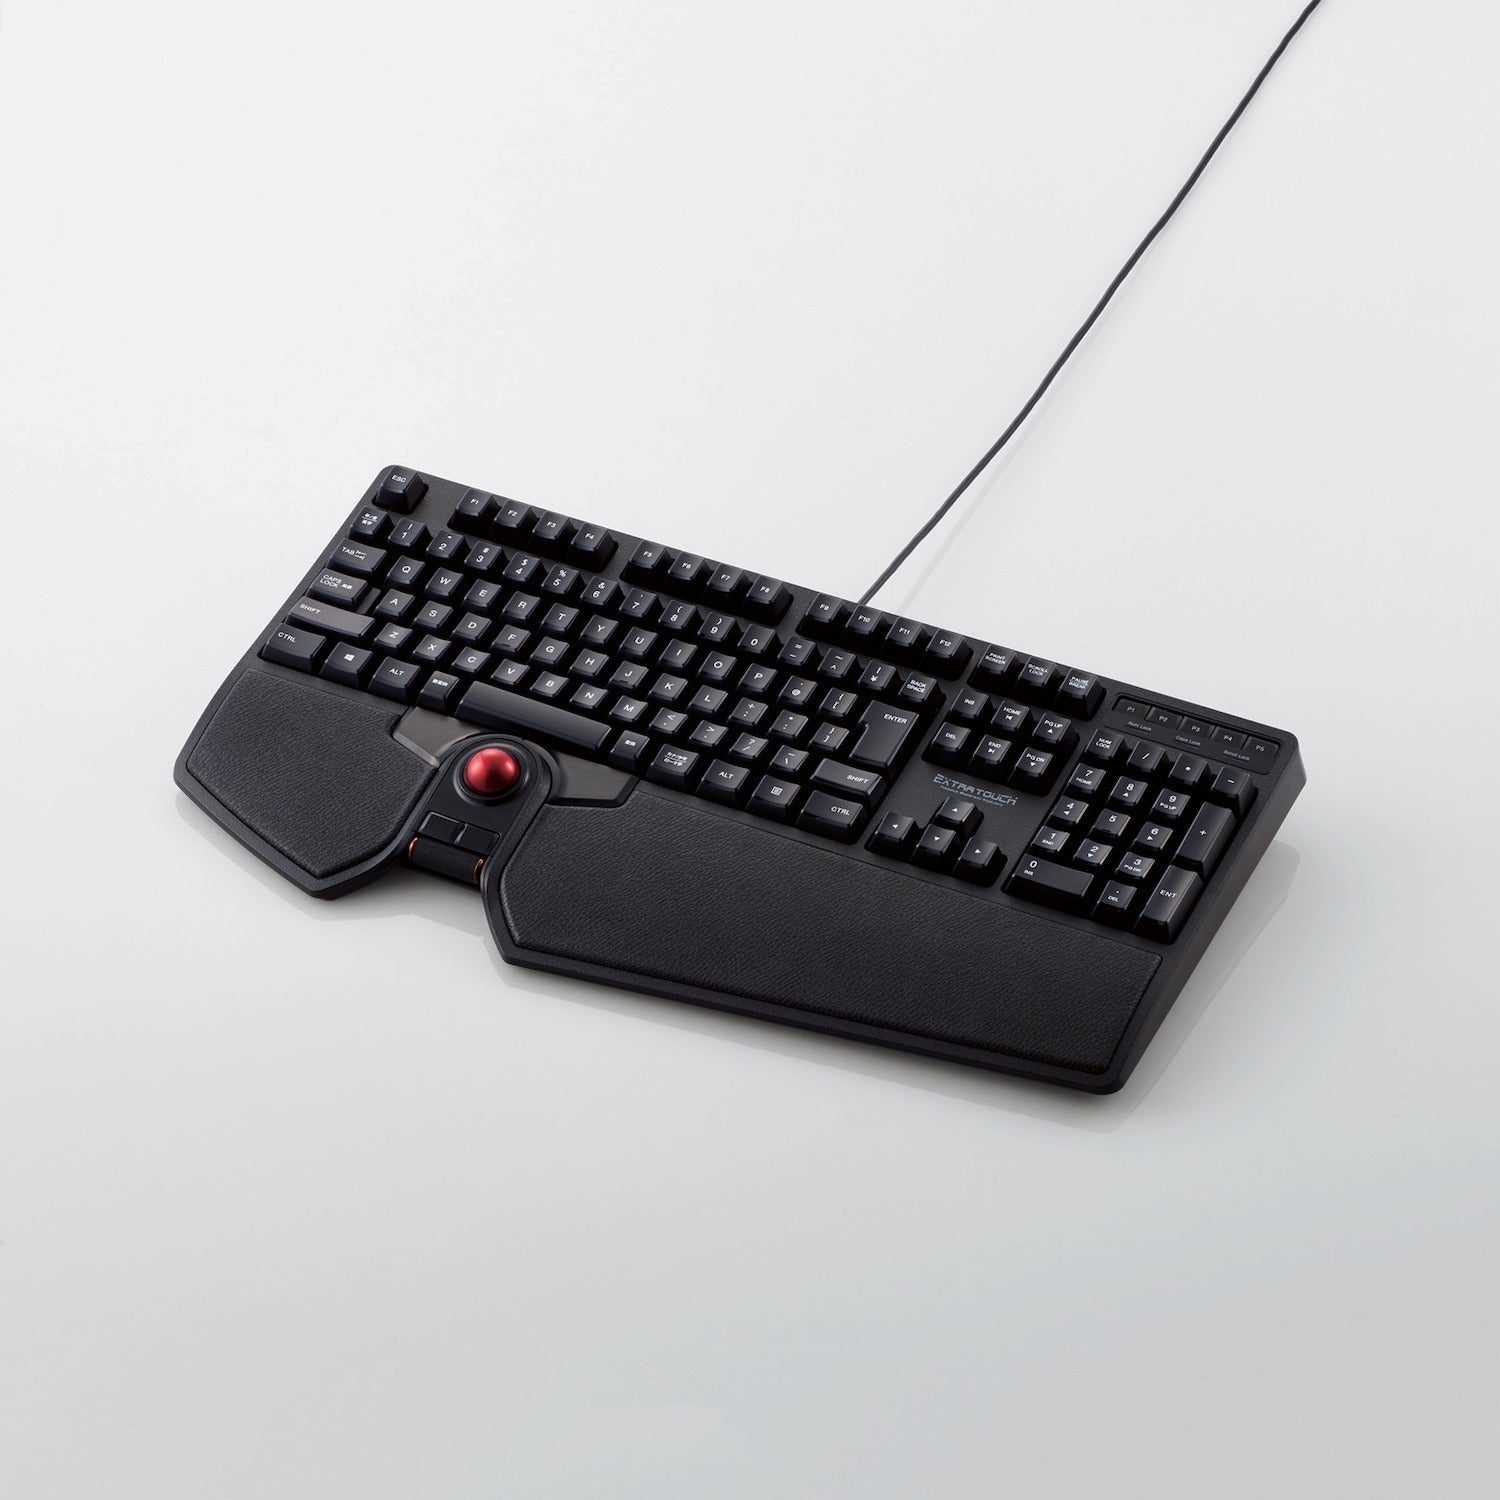 Japanese Layout Keyboard with Built-in Trackball & Scroll Wheel